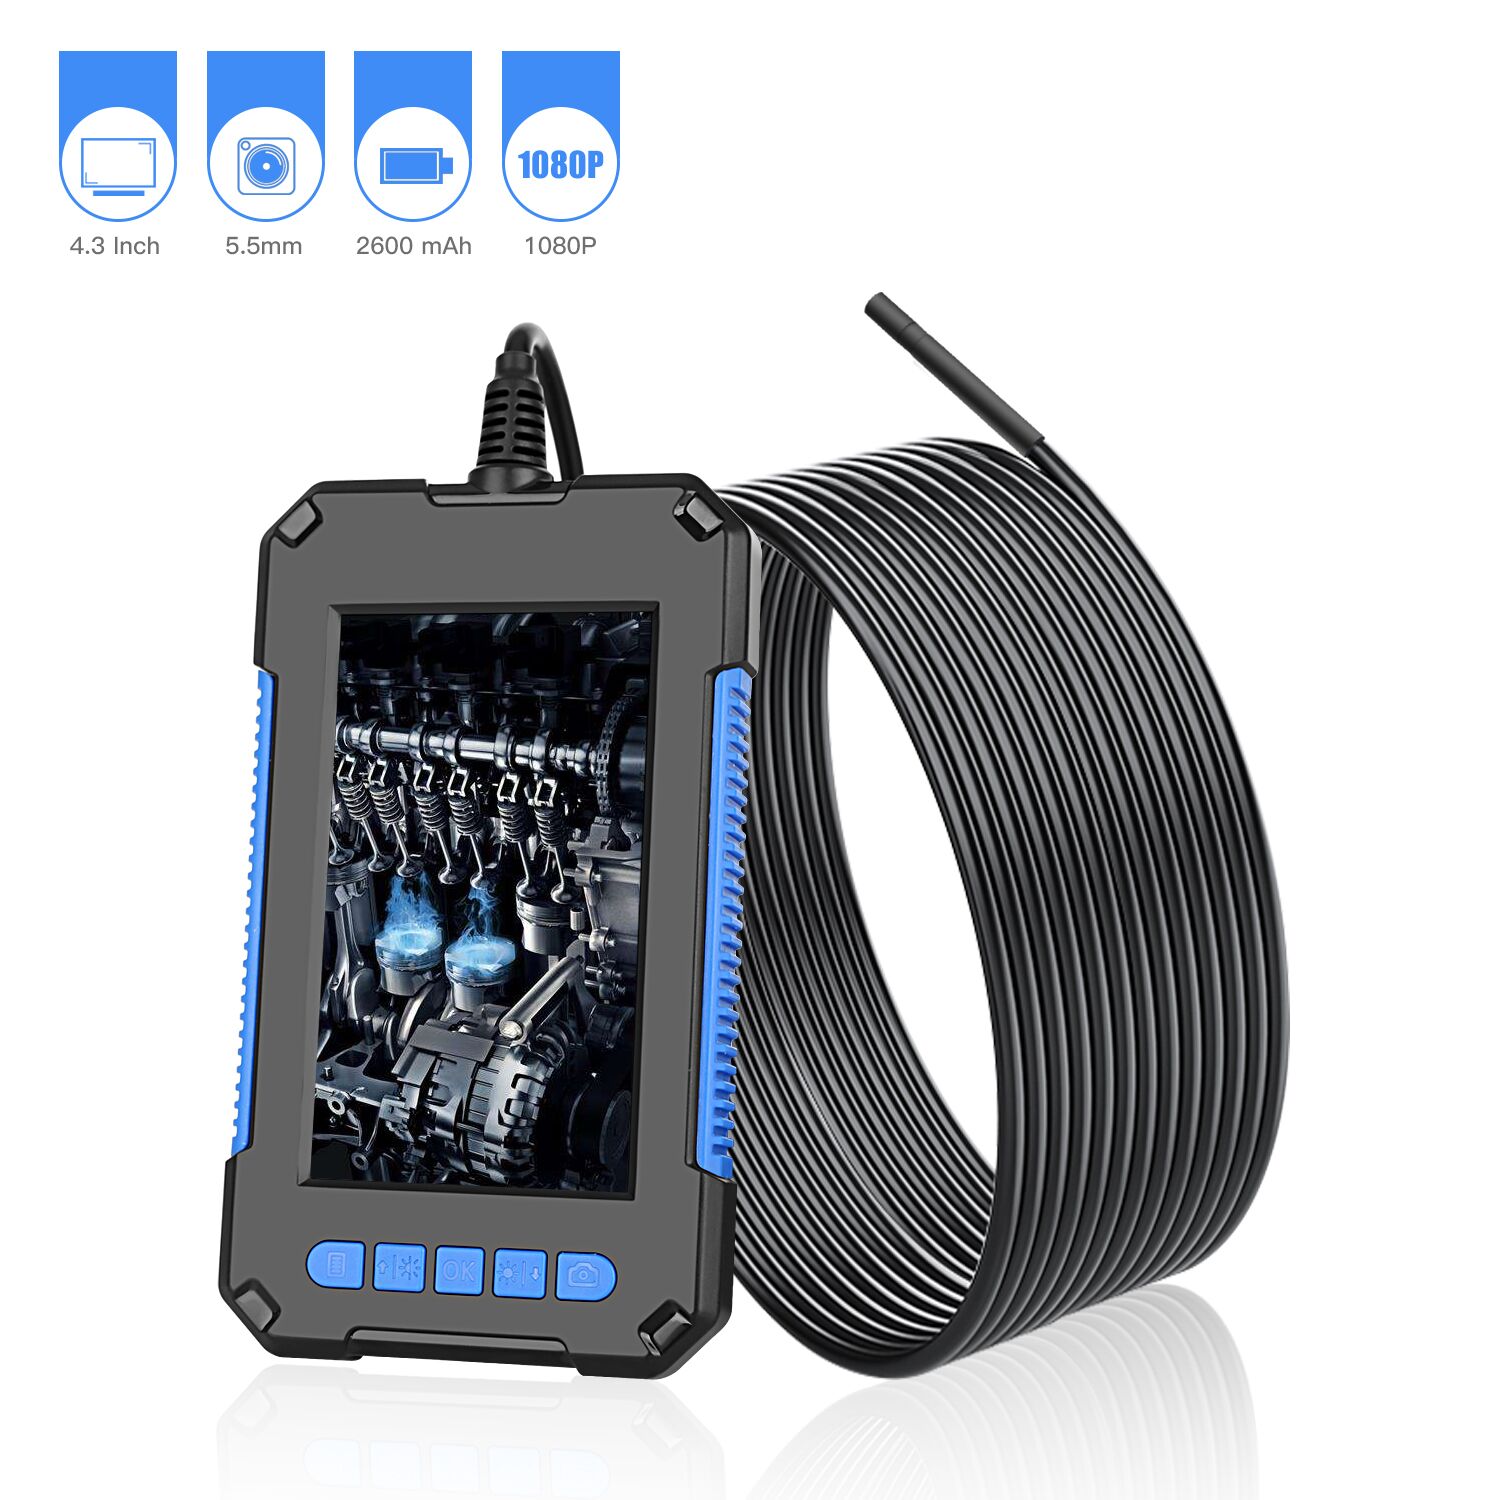 1080P HD Digital Borescope With 6 LED Lights and 16.5FT Semi-Rigid Cable